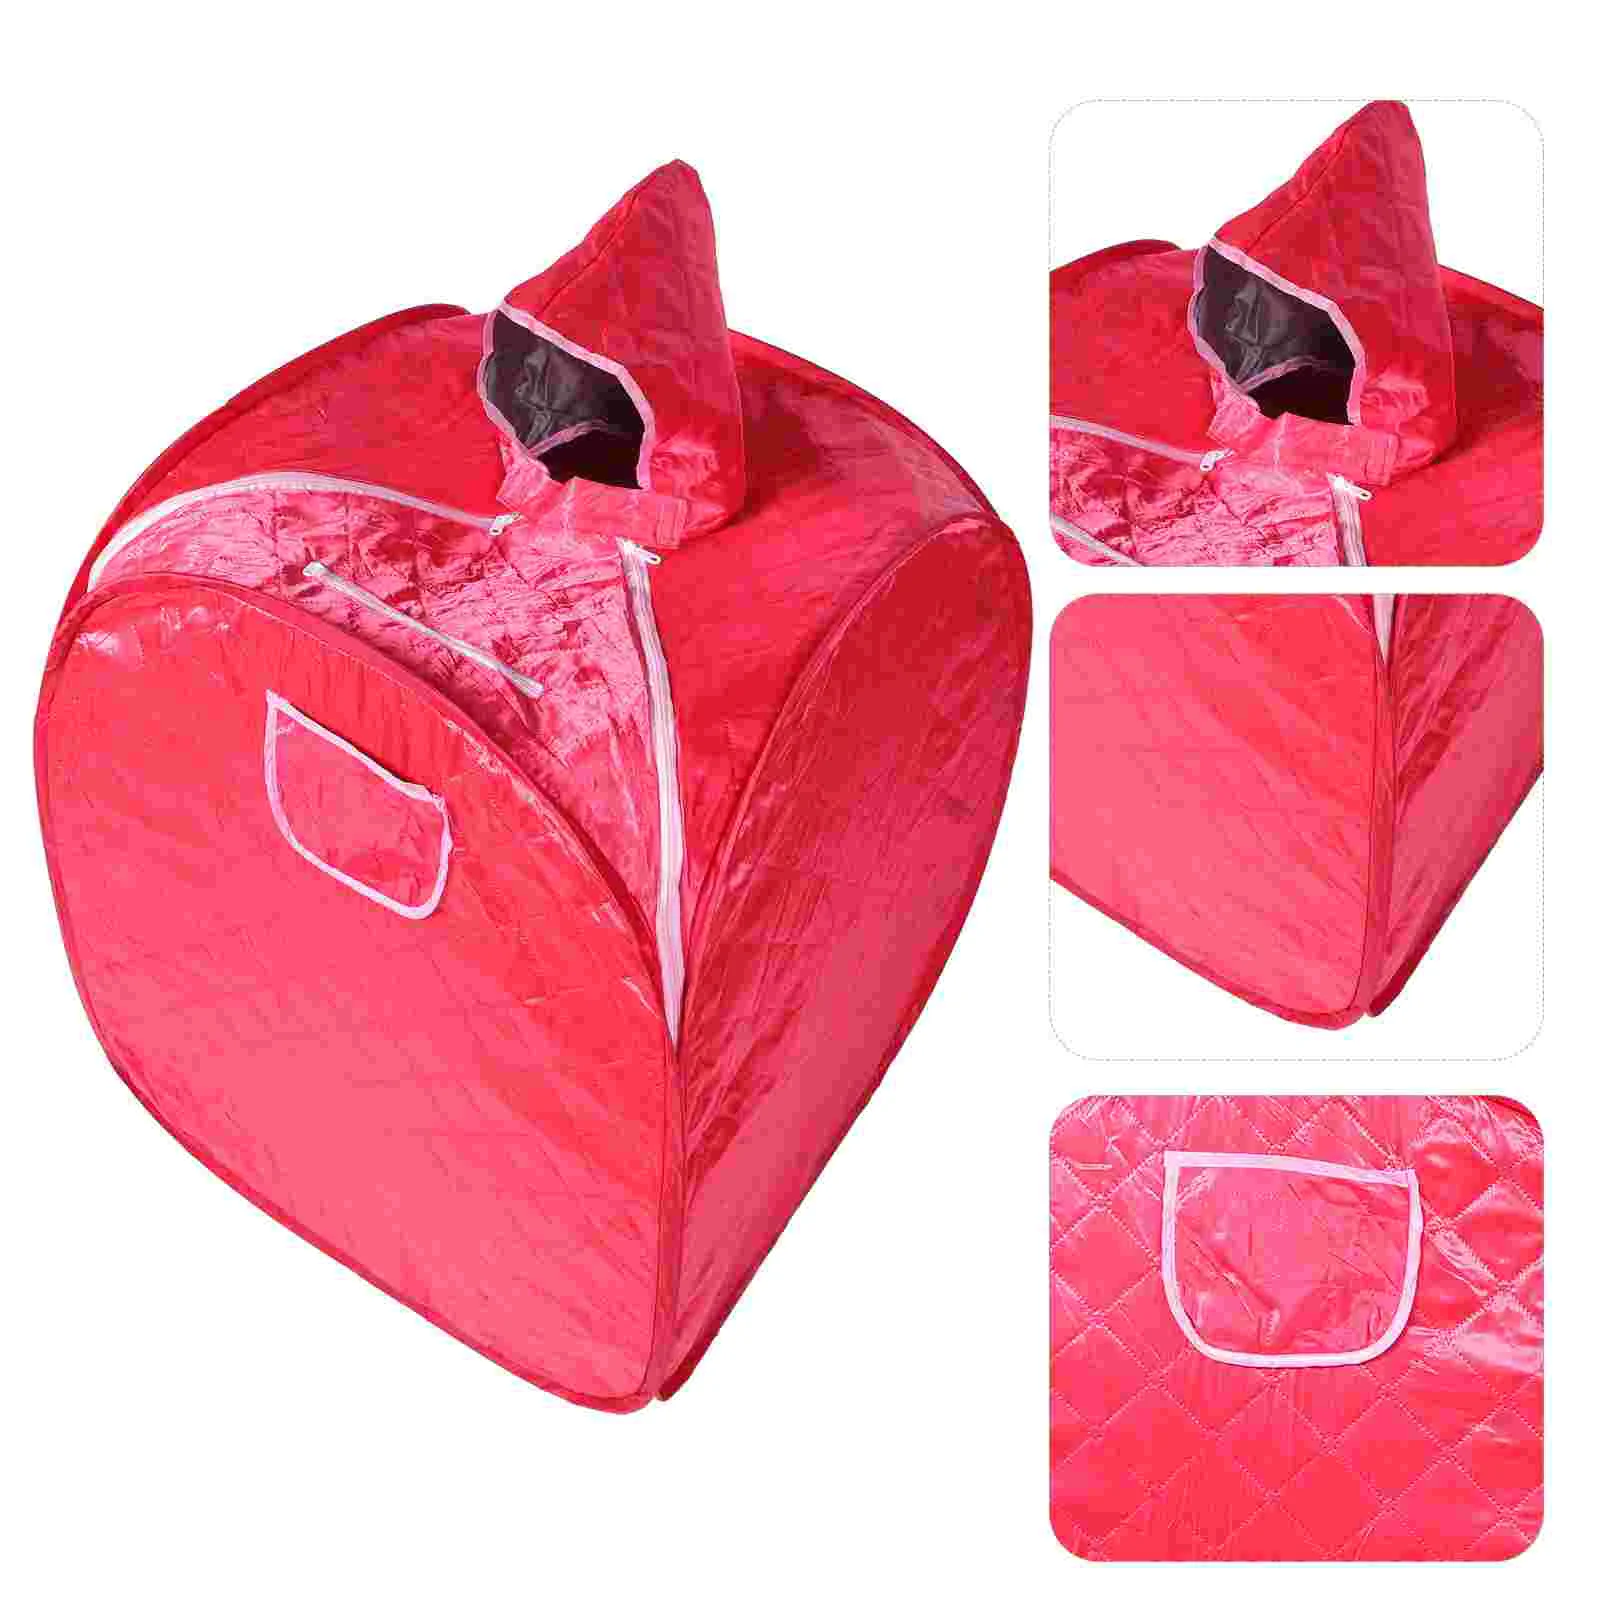 

Portable Steam Room Folding Box Sauna Tents Sweat Home Single Person Spa Reusable Individual Baths and rooms